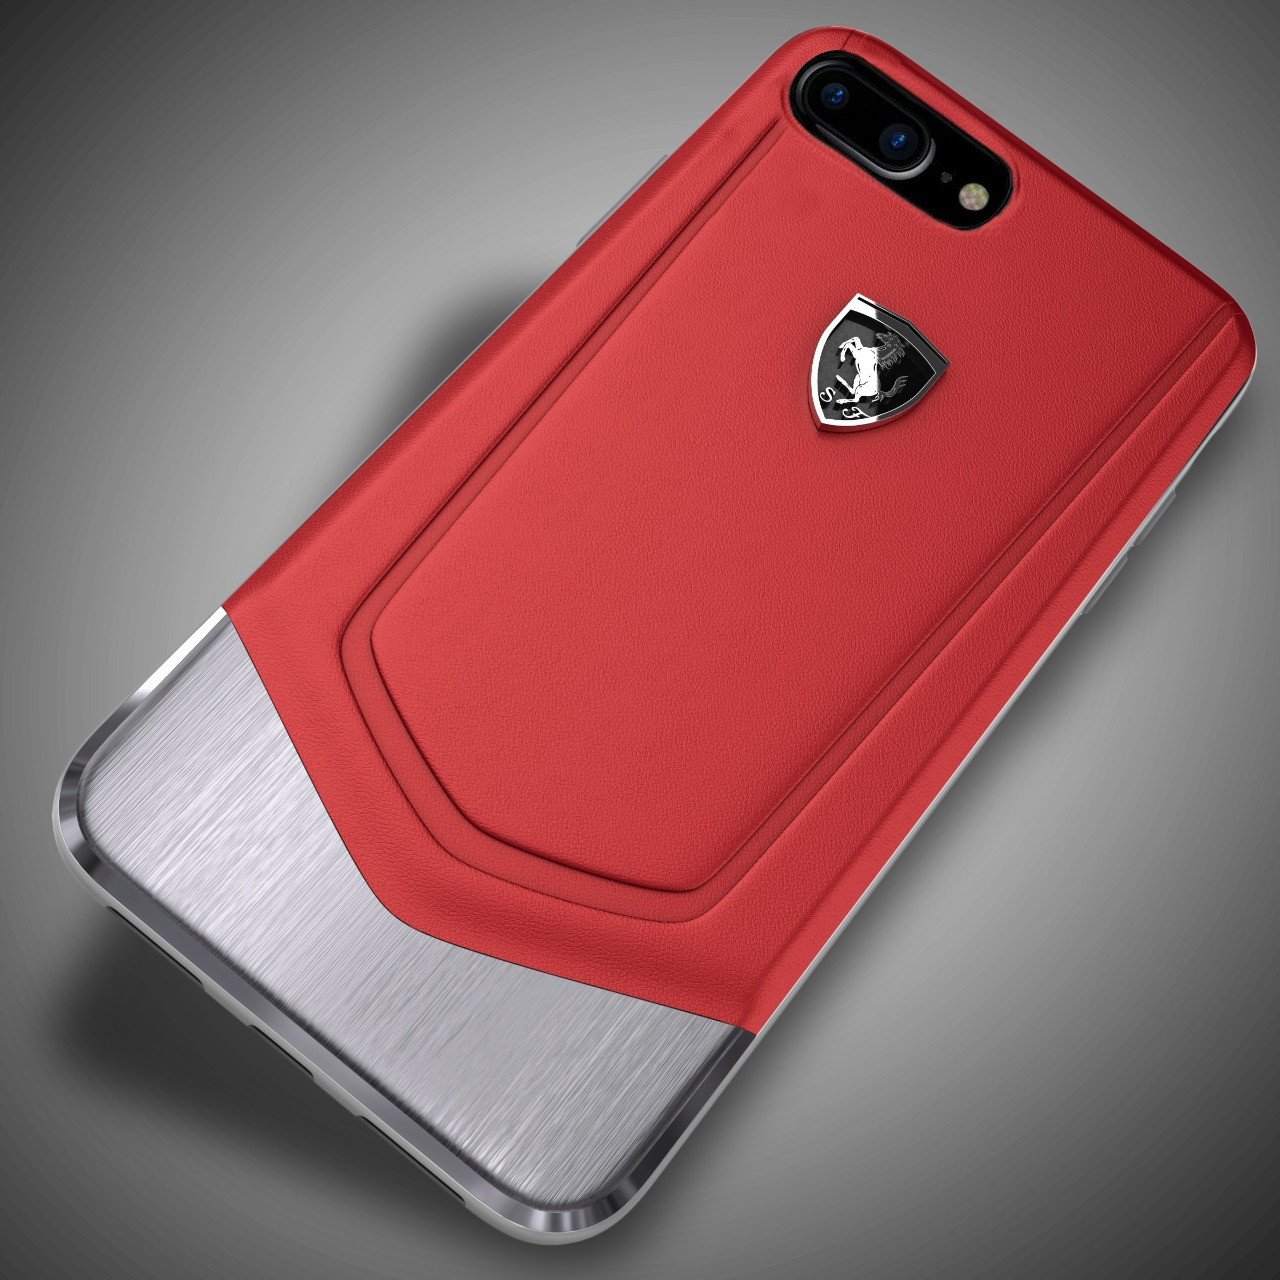 Ferrari ® Apple iPhone 7 Plus Moranello Series Luxurious Leather Metal Case Limited Edition Back Cover